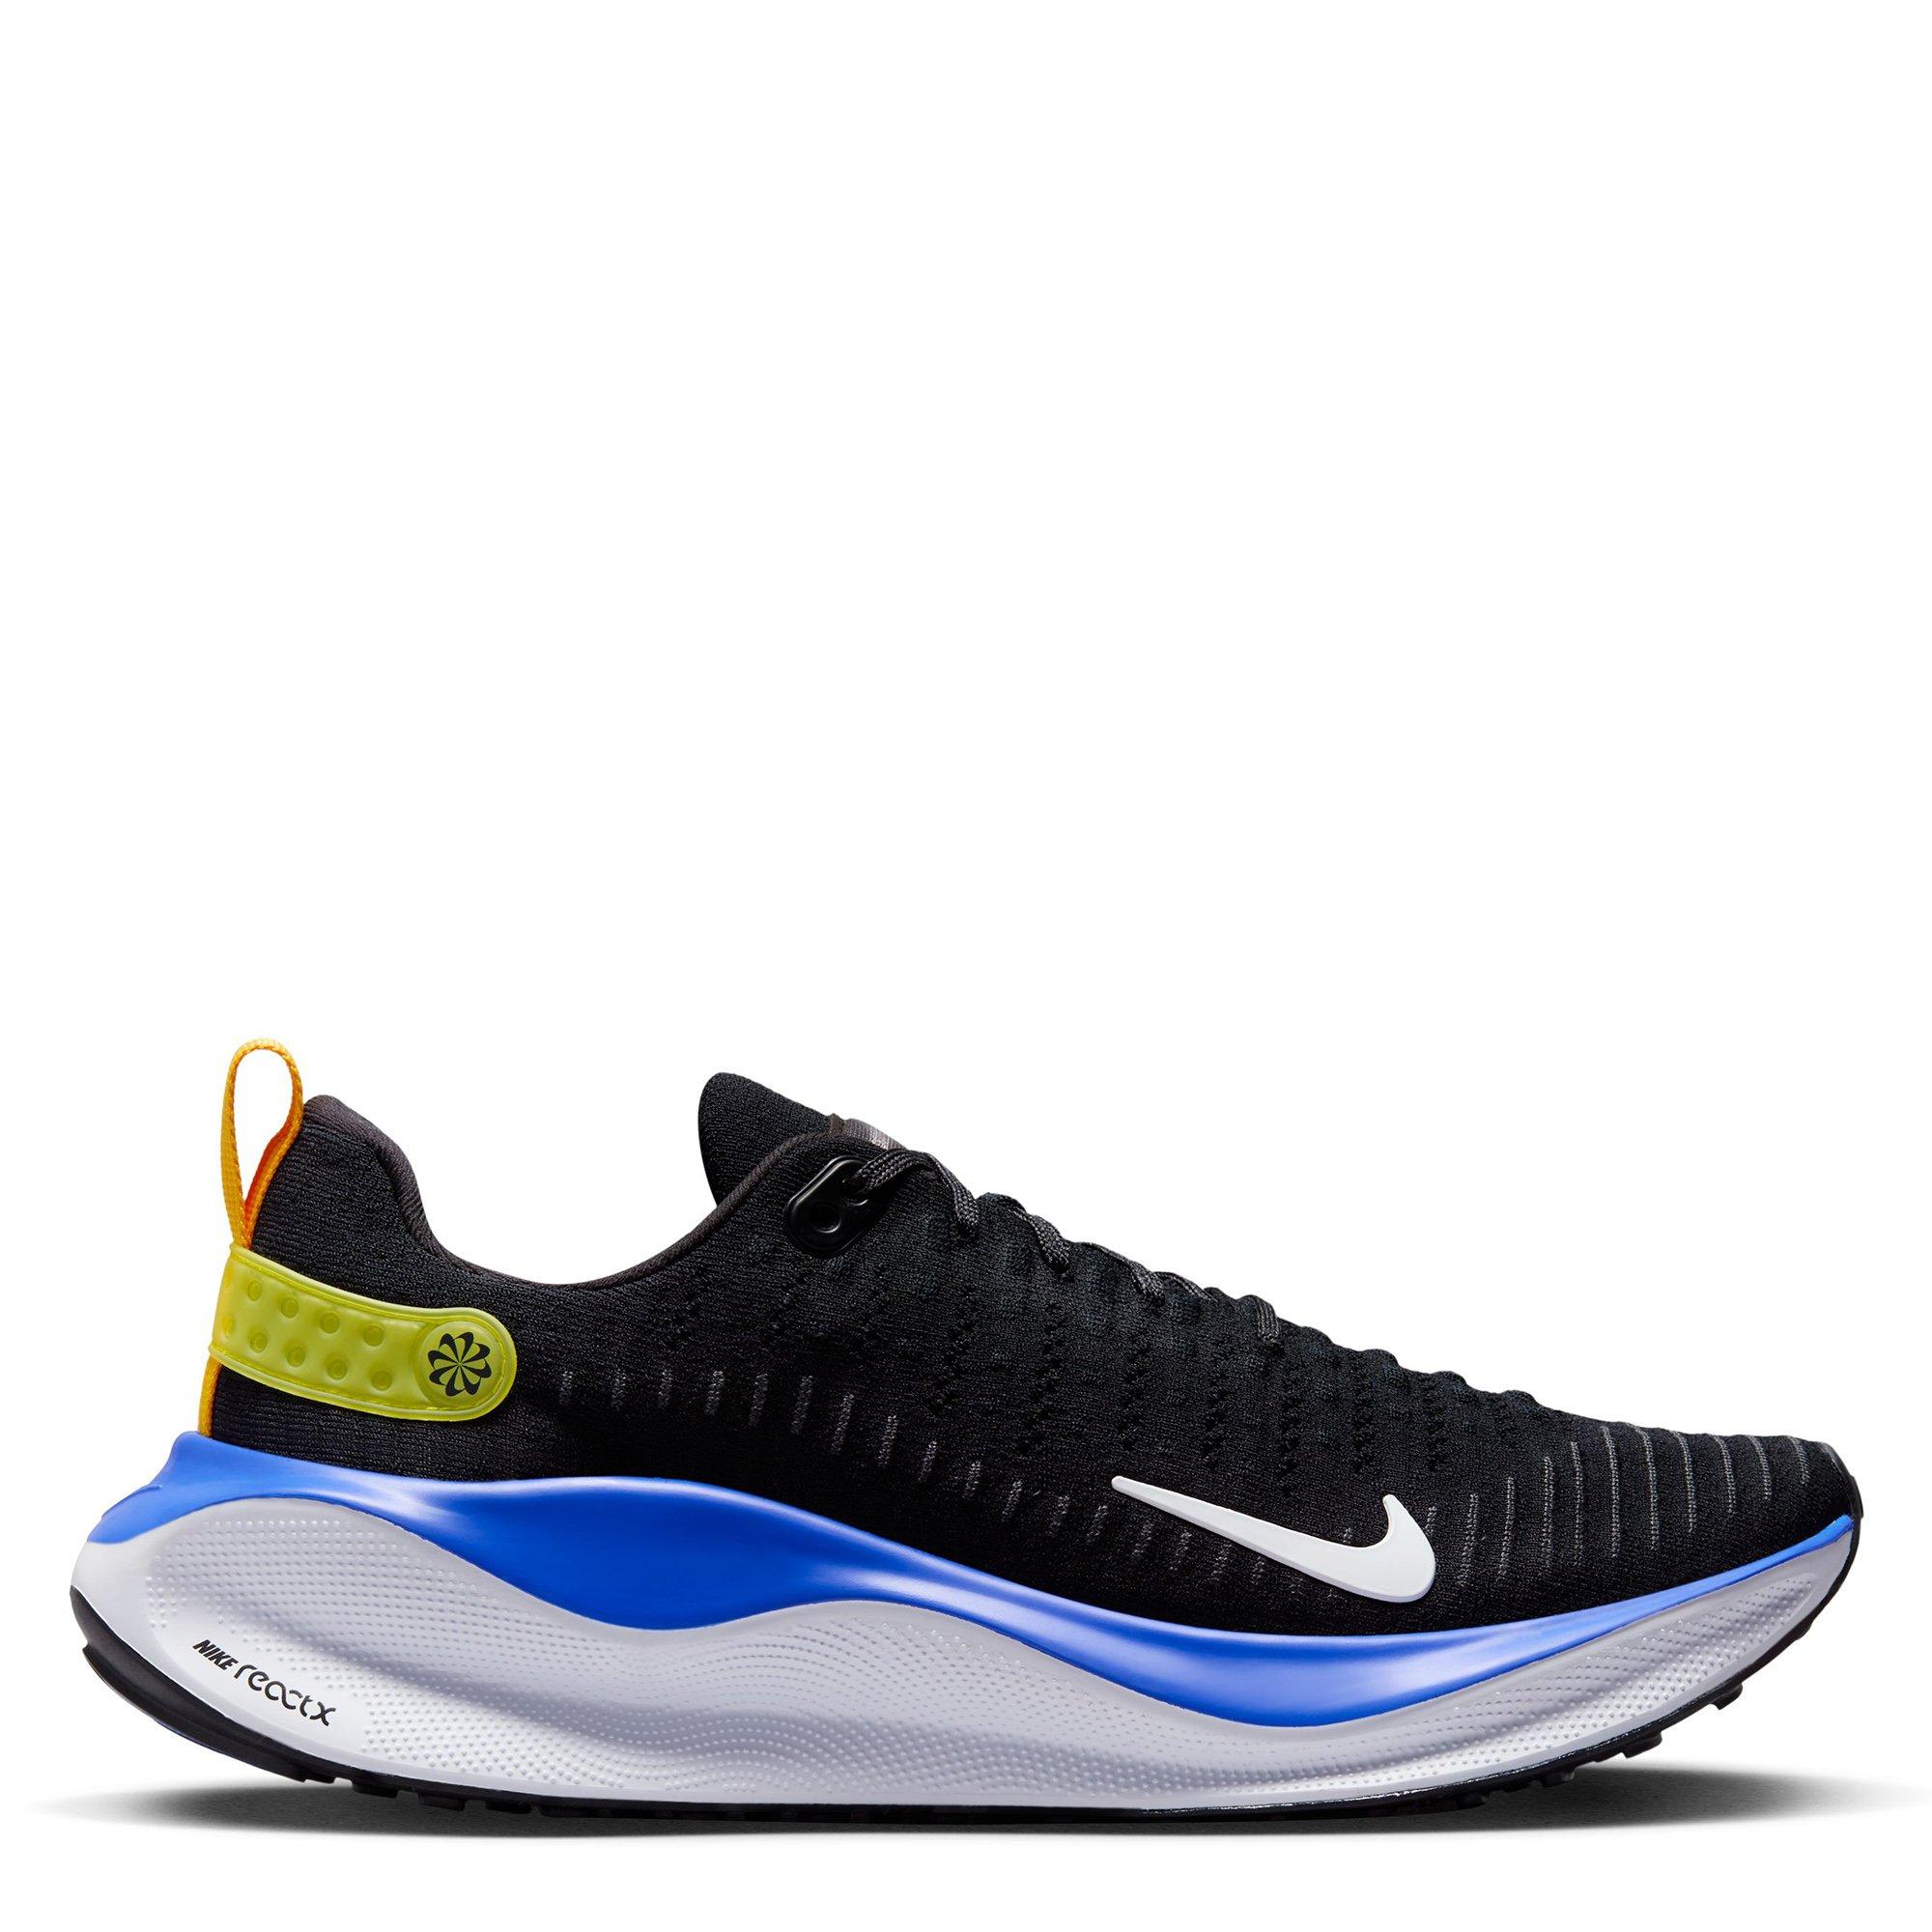 Nike | React Infinity RN 4 Mens Running Shoes | Everyday Neutral Road ...